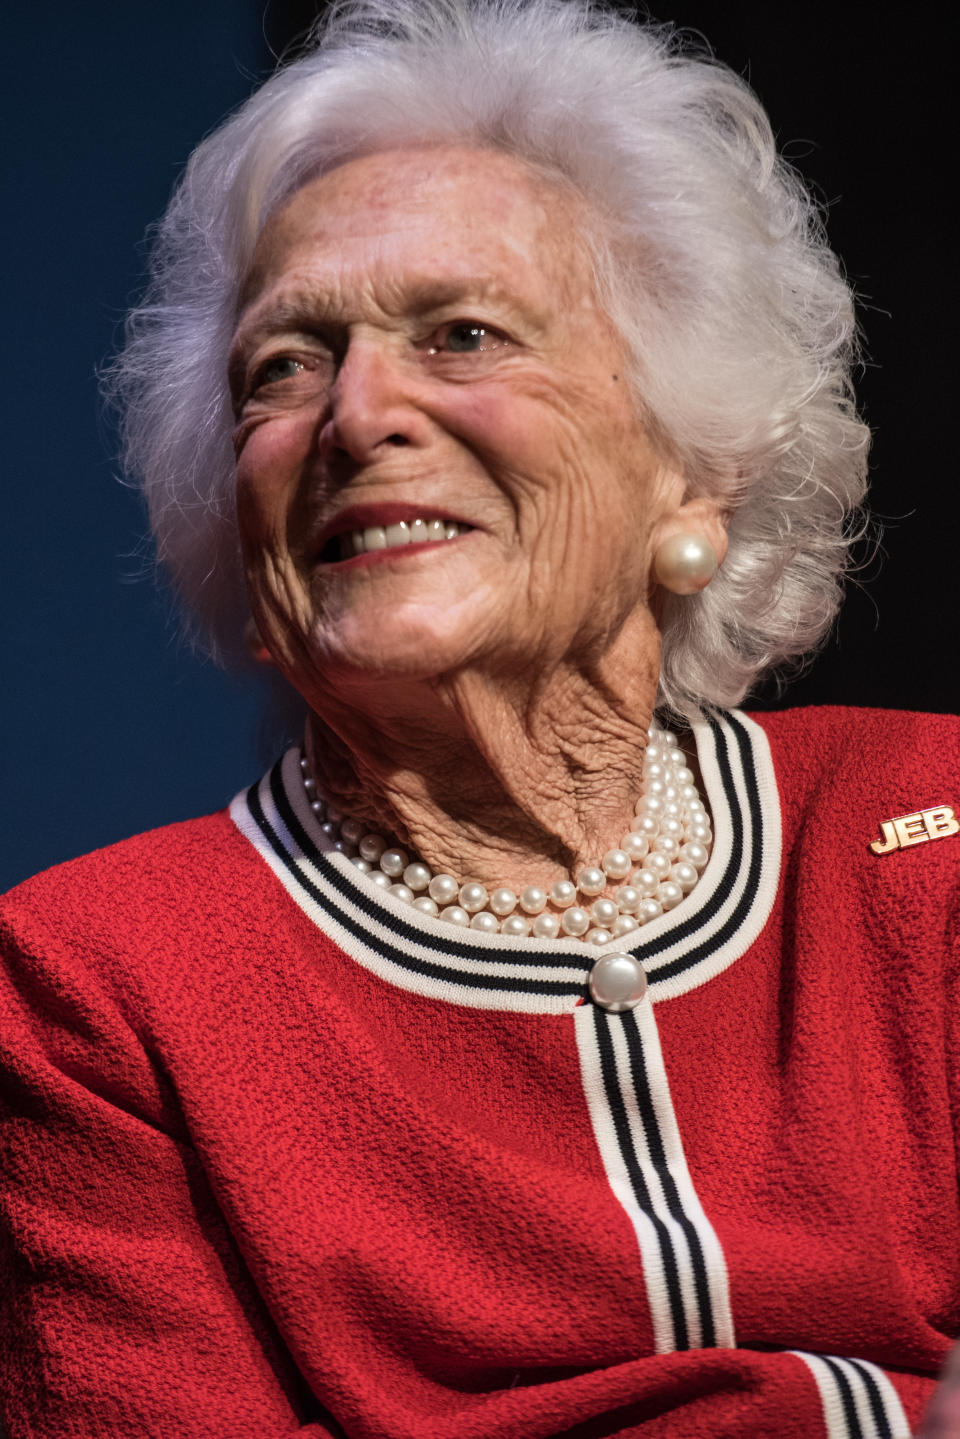 Barbara Bush, pictured in 2016, died Tuesday at age 92. (Photo: Sean Rayford/Getty Images)